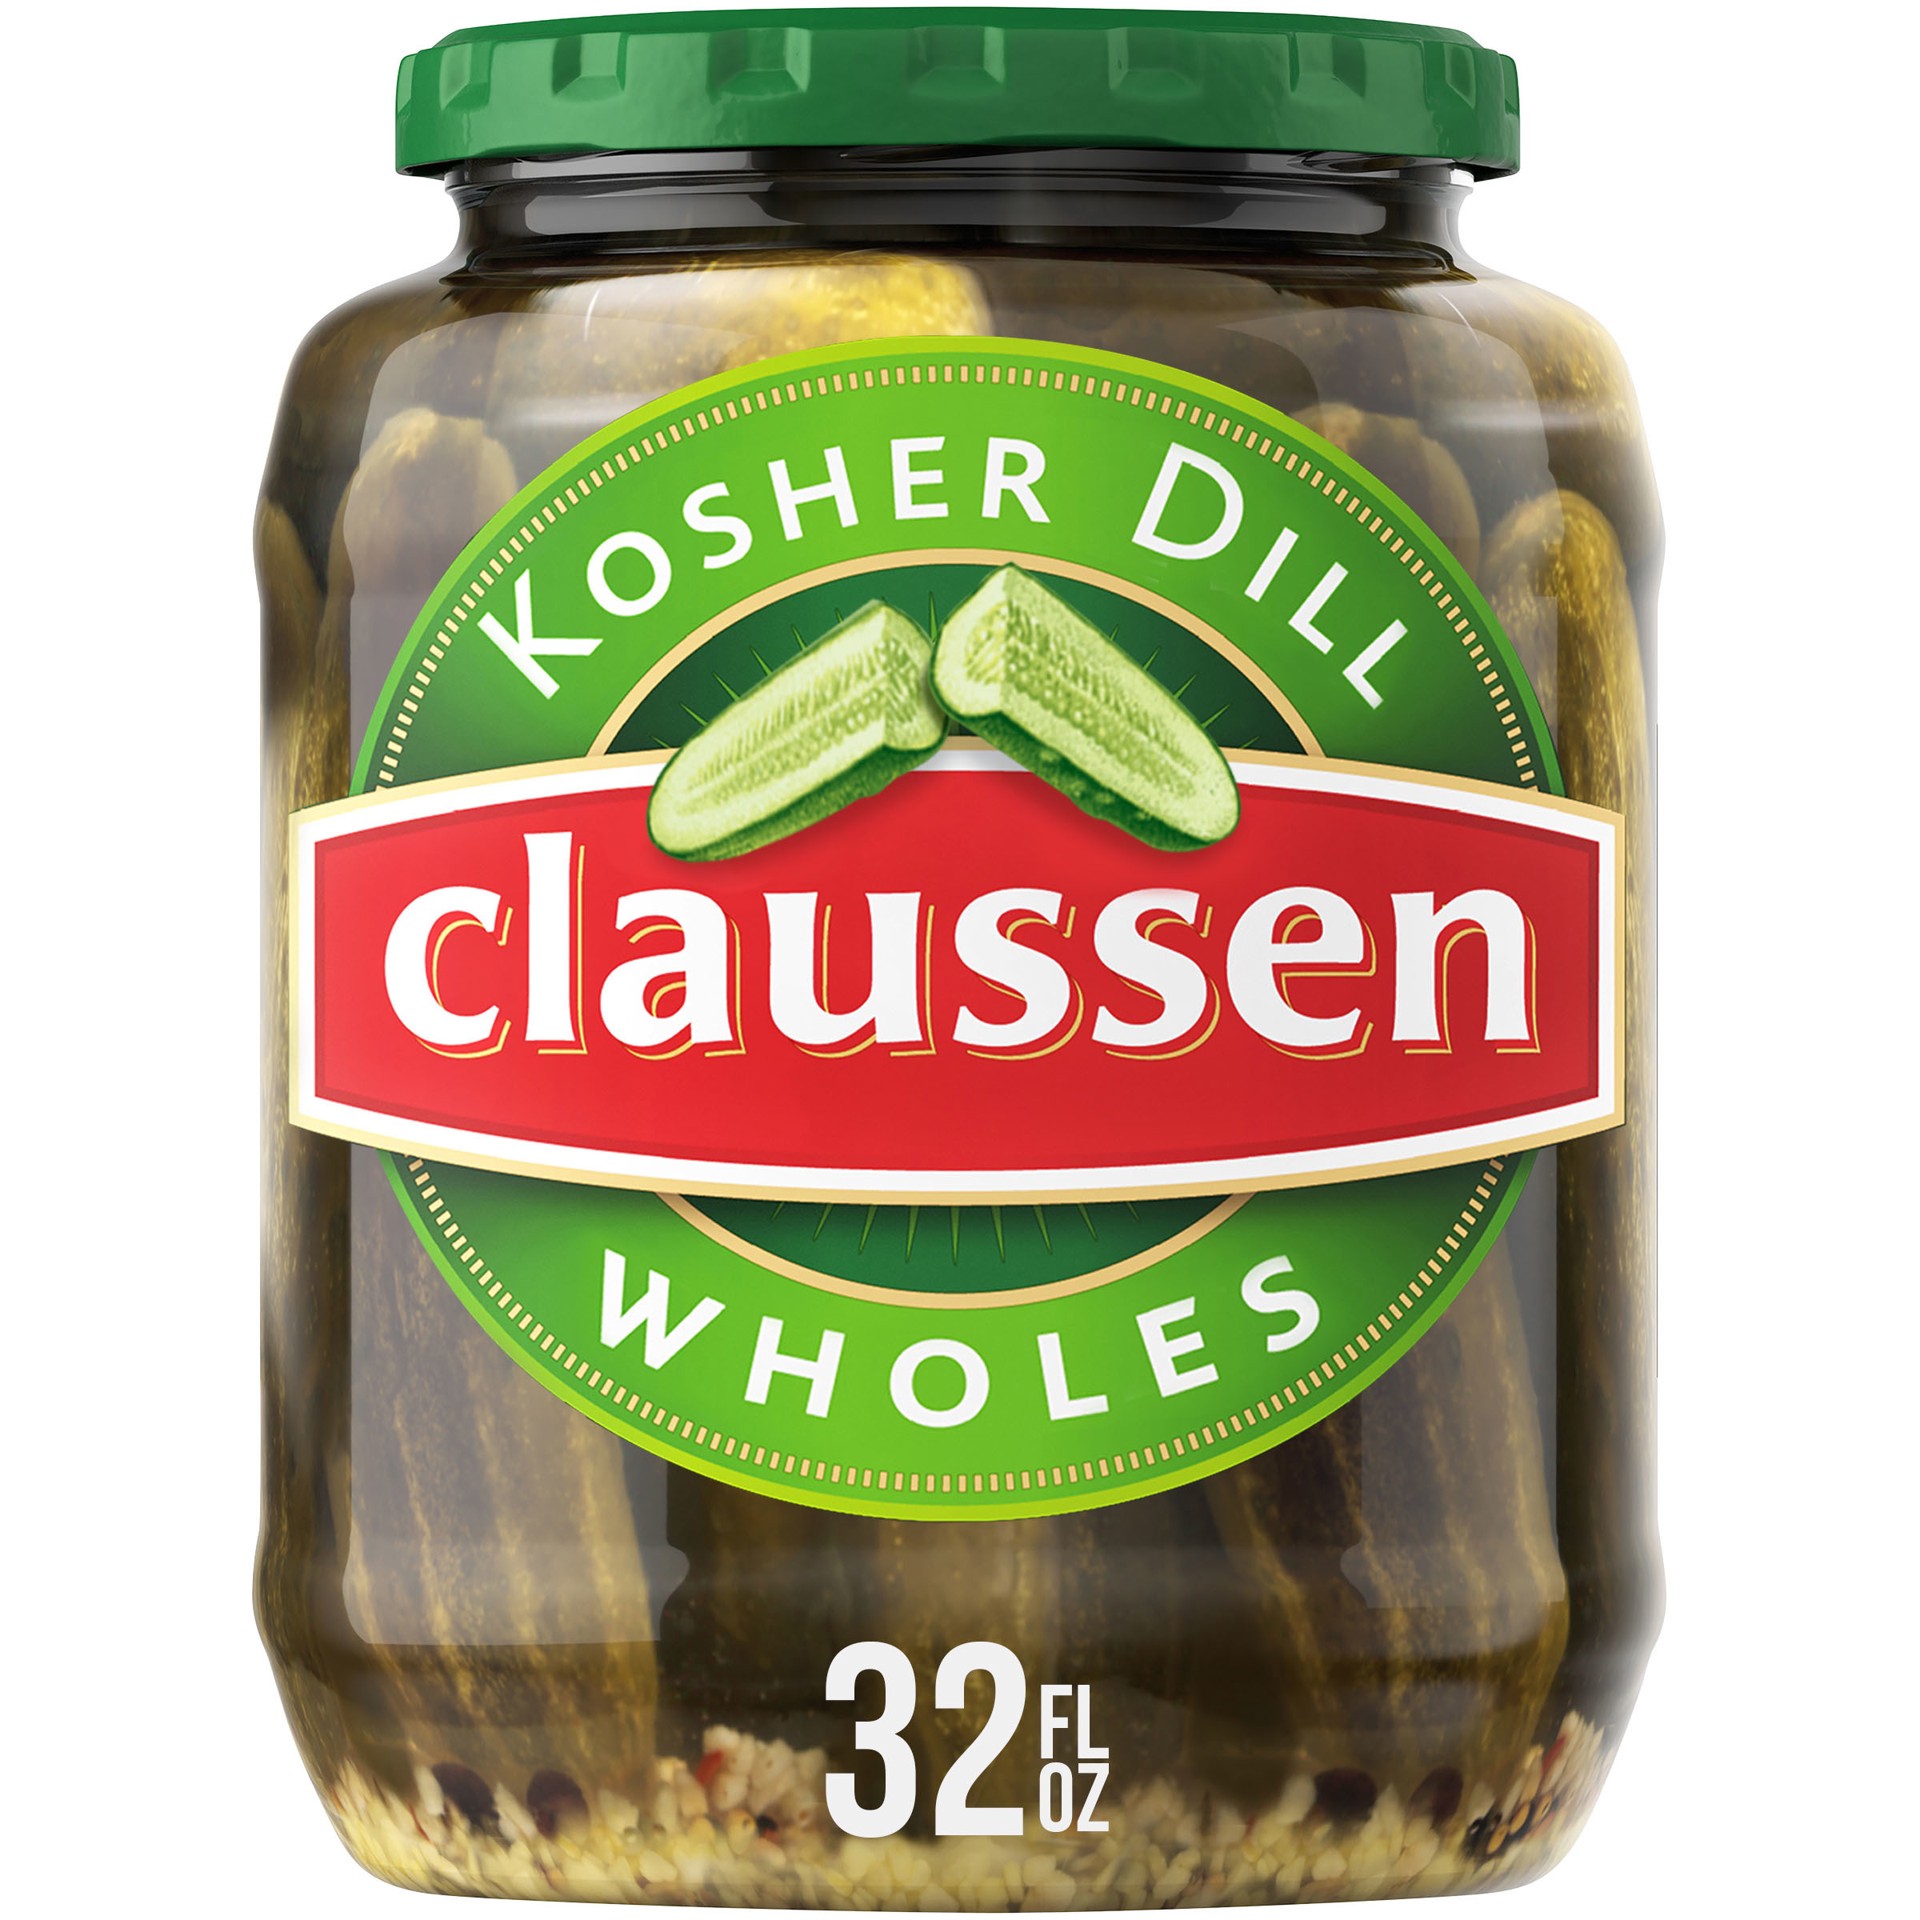 slide 1 of 5, Claussen Kosher Dill Whole Pickles, 32 fl oz